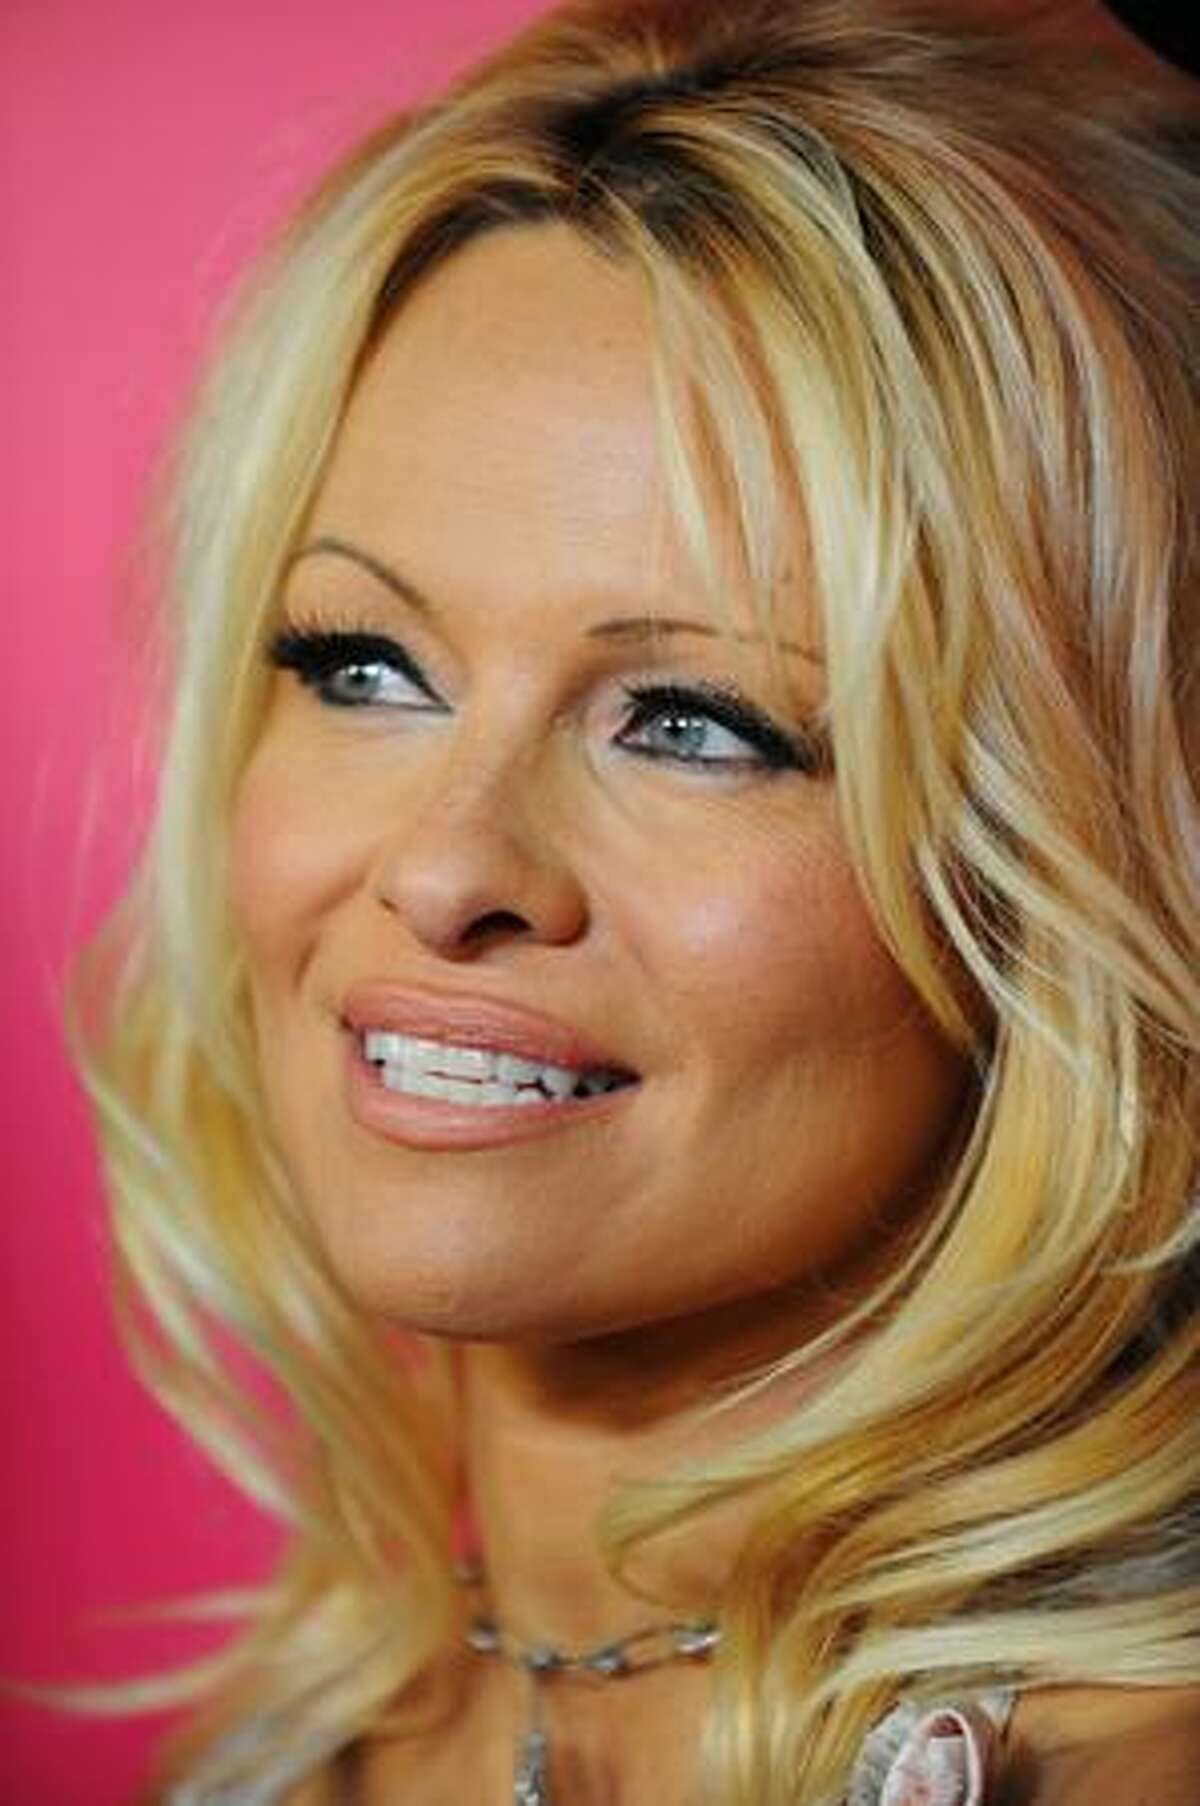 Actress Pamela Anderson arrives for the 6th Annual Hollywood Style Awards at Armand Hammer Museum in Los Angeles, California.